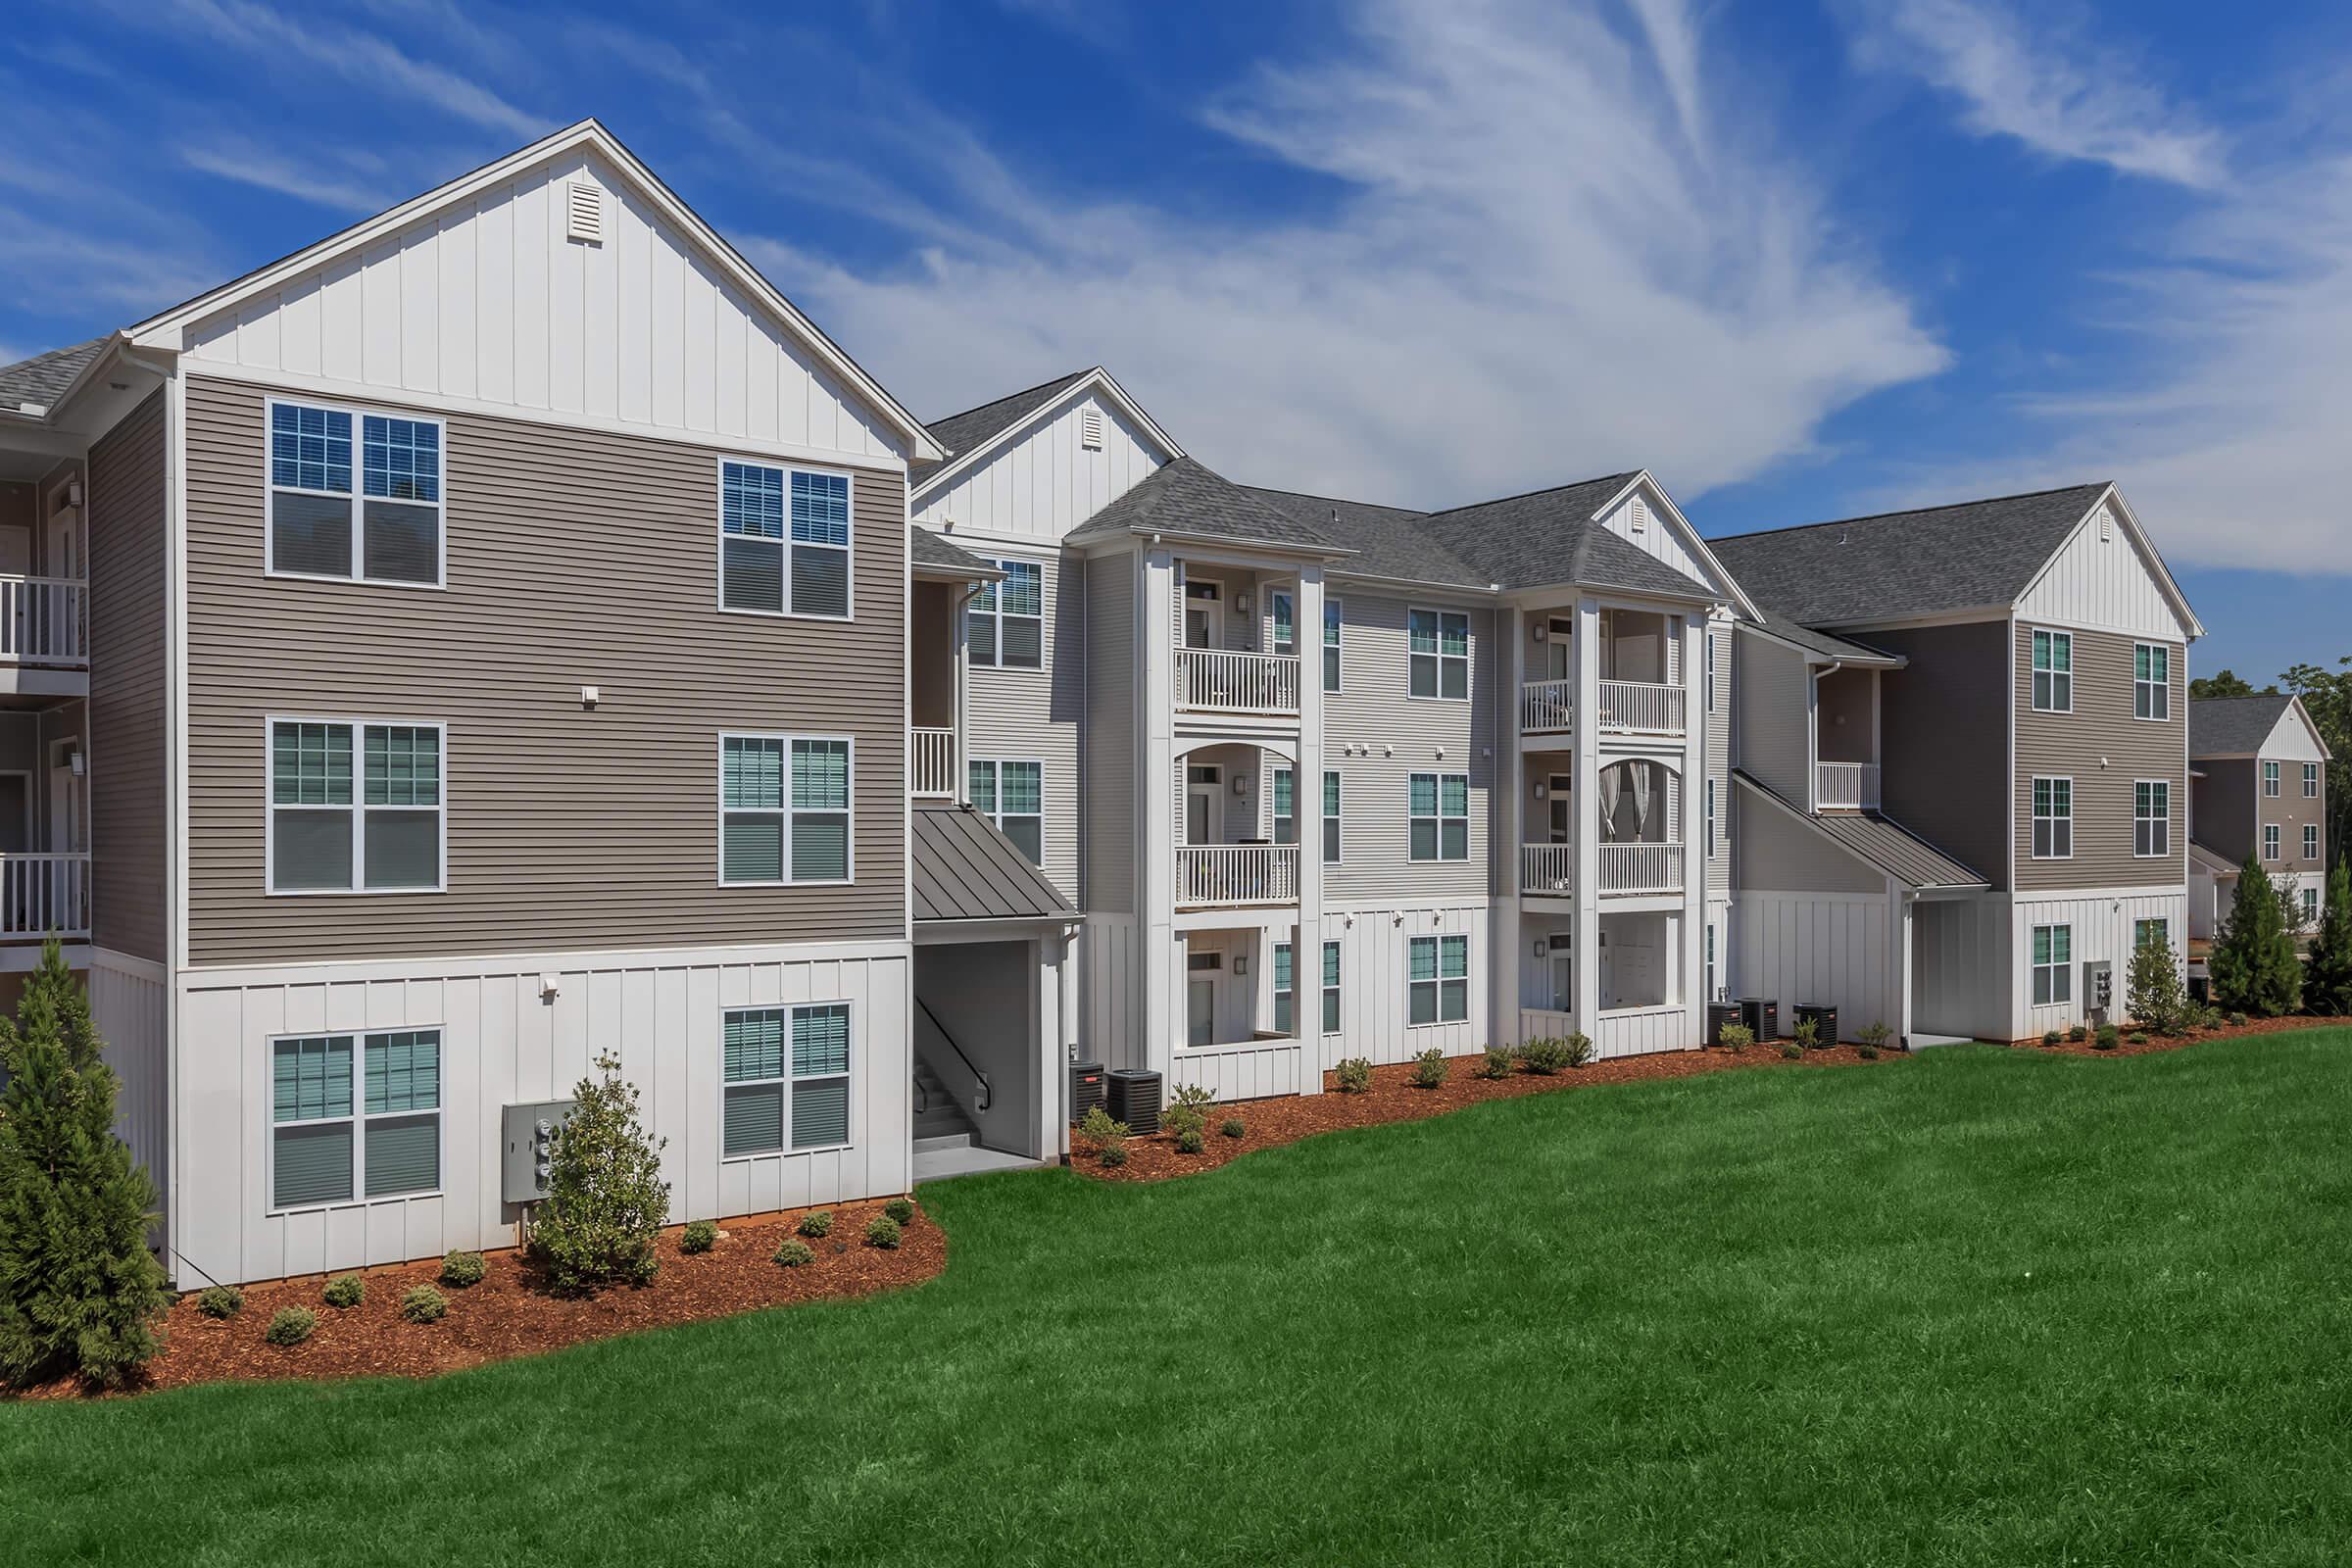 Charming Community In Riverstone Apartments At Long Shoals In Arden, North Carolina